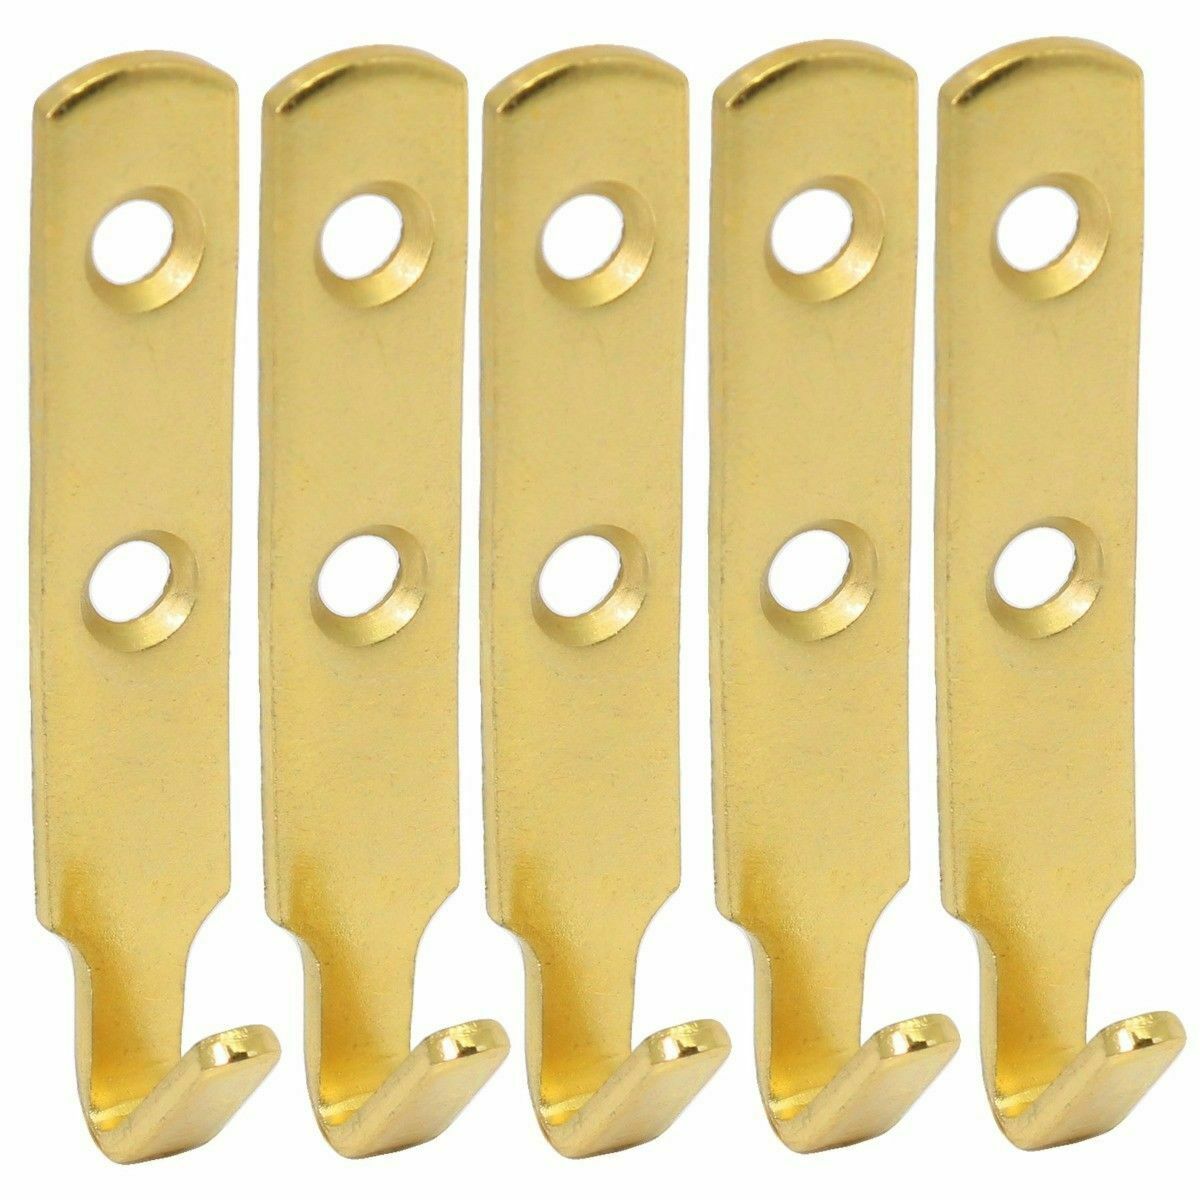 Large J Picture Hooks - Brass - 2 Pack